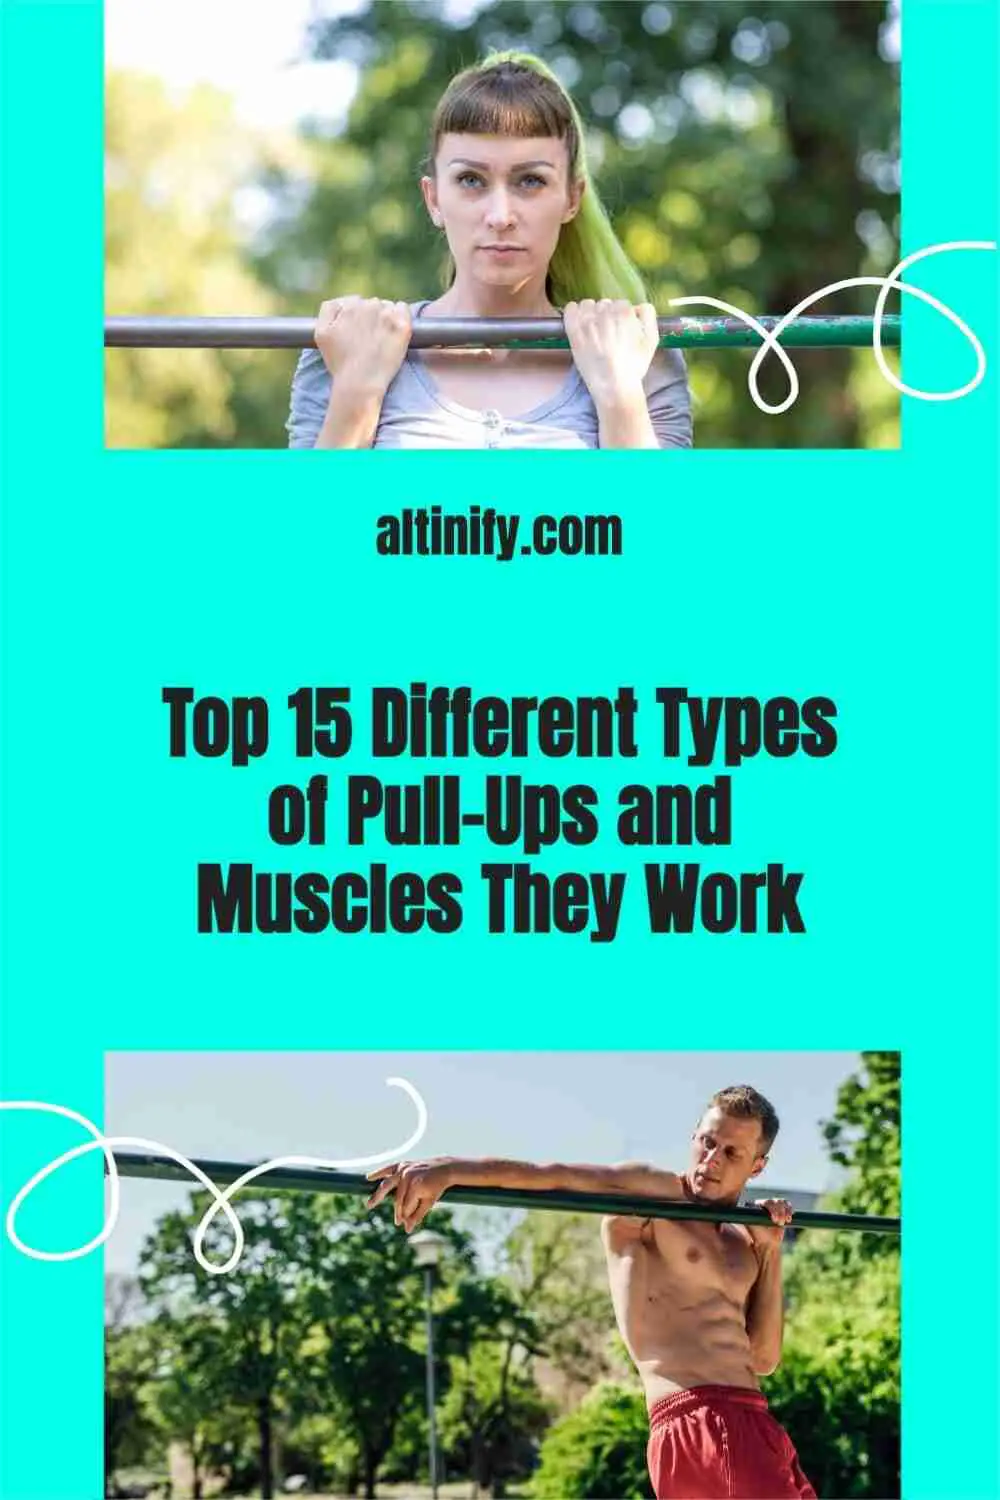 Top 15 Different Types of Pull-Ups and Muscles They Work